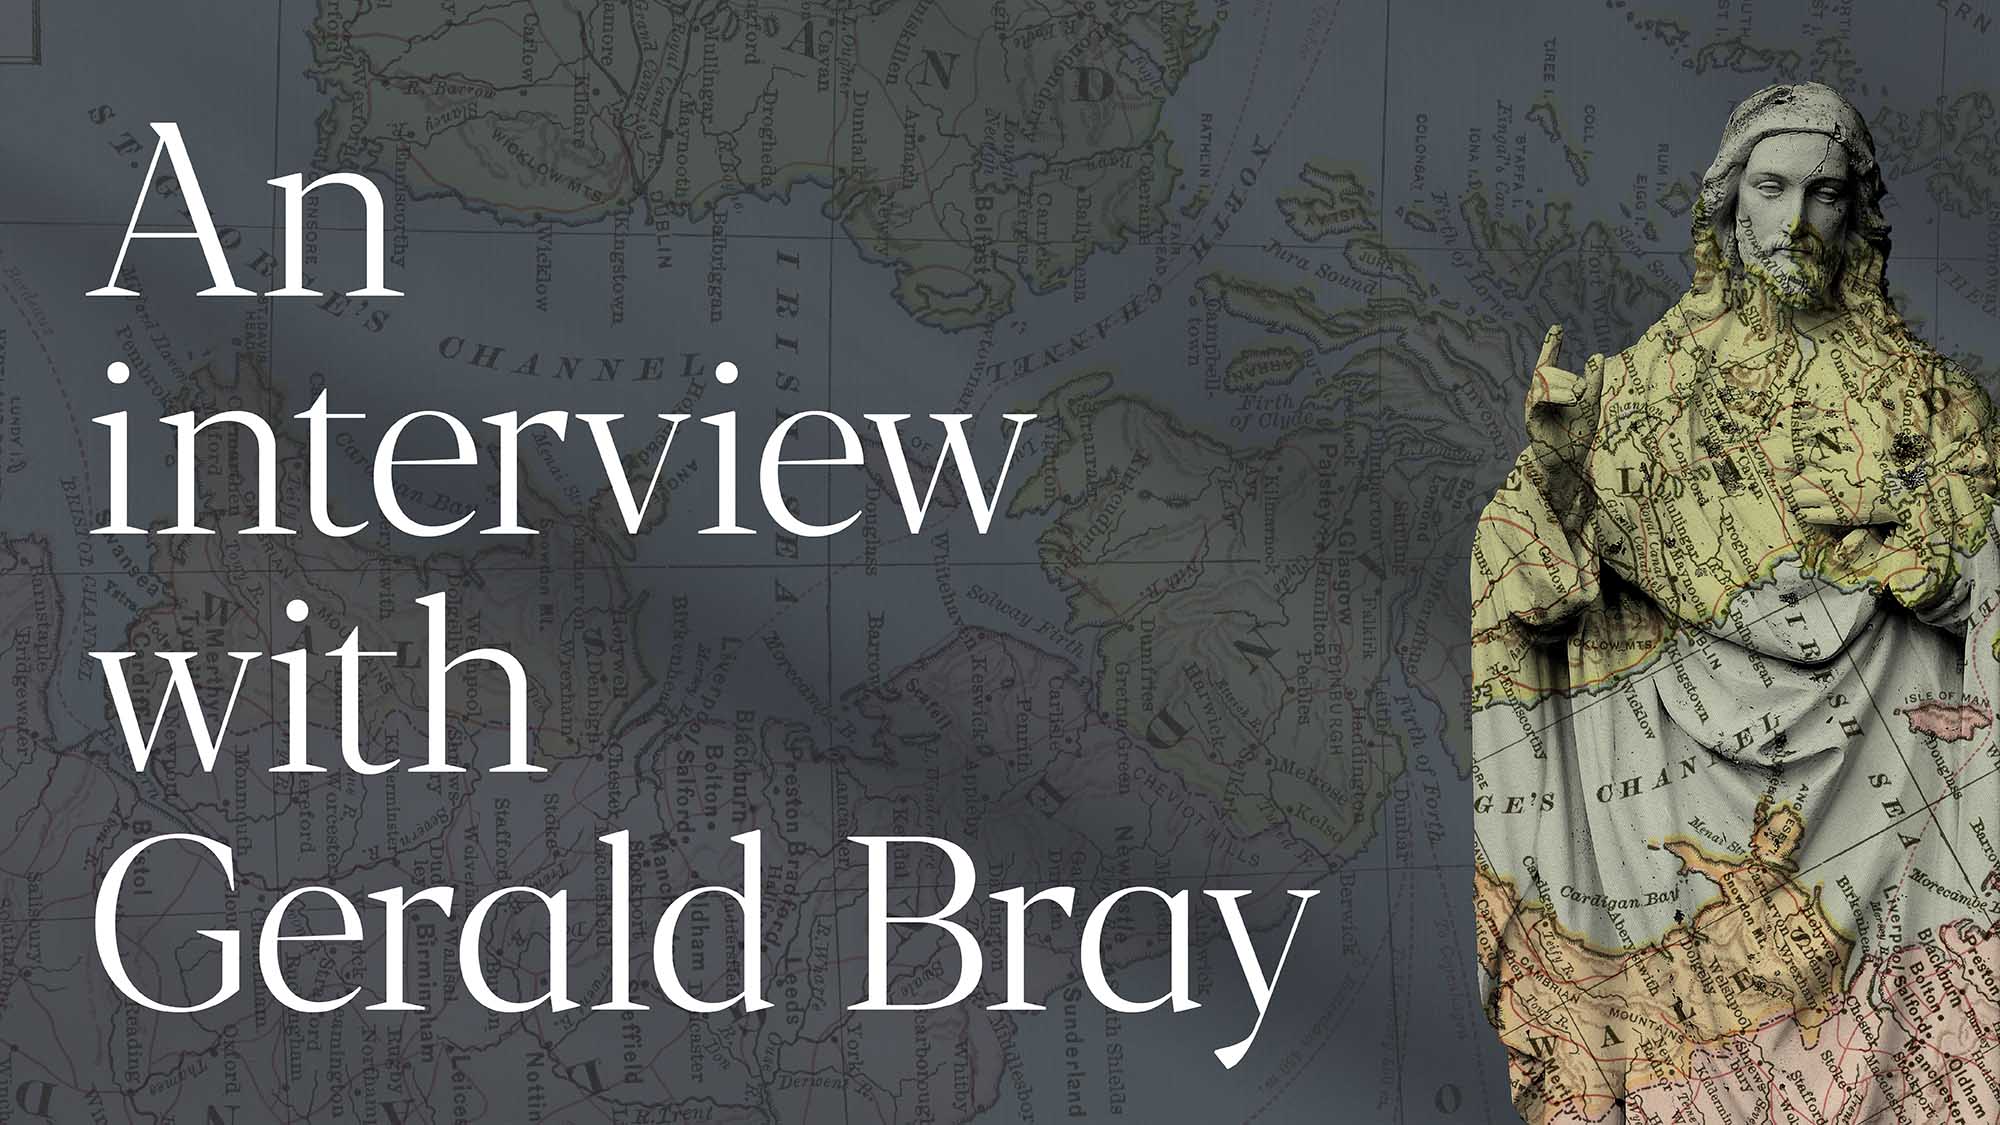 An Interview with Gerald Bray